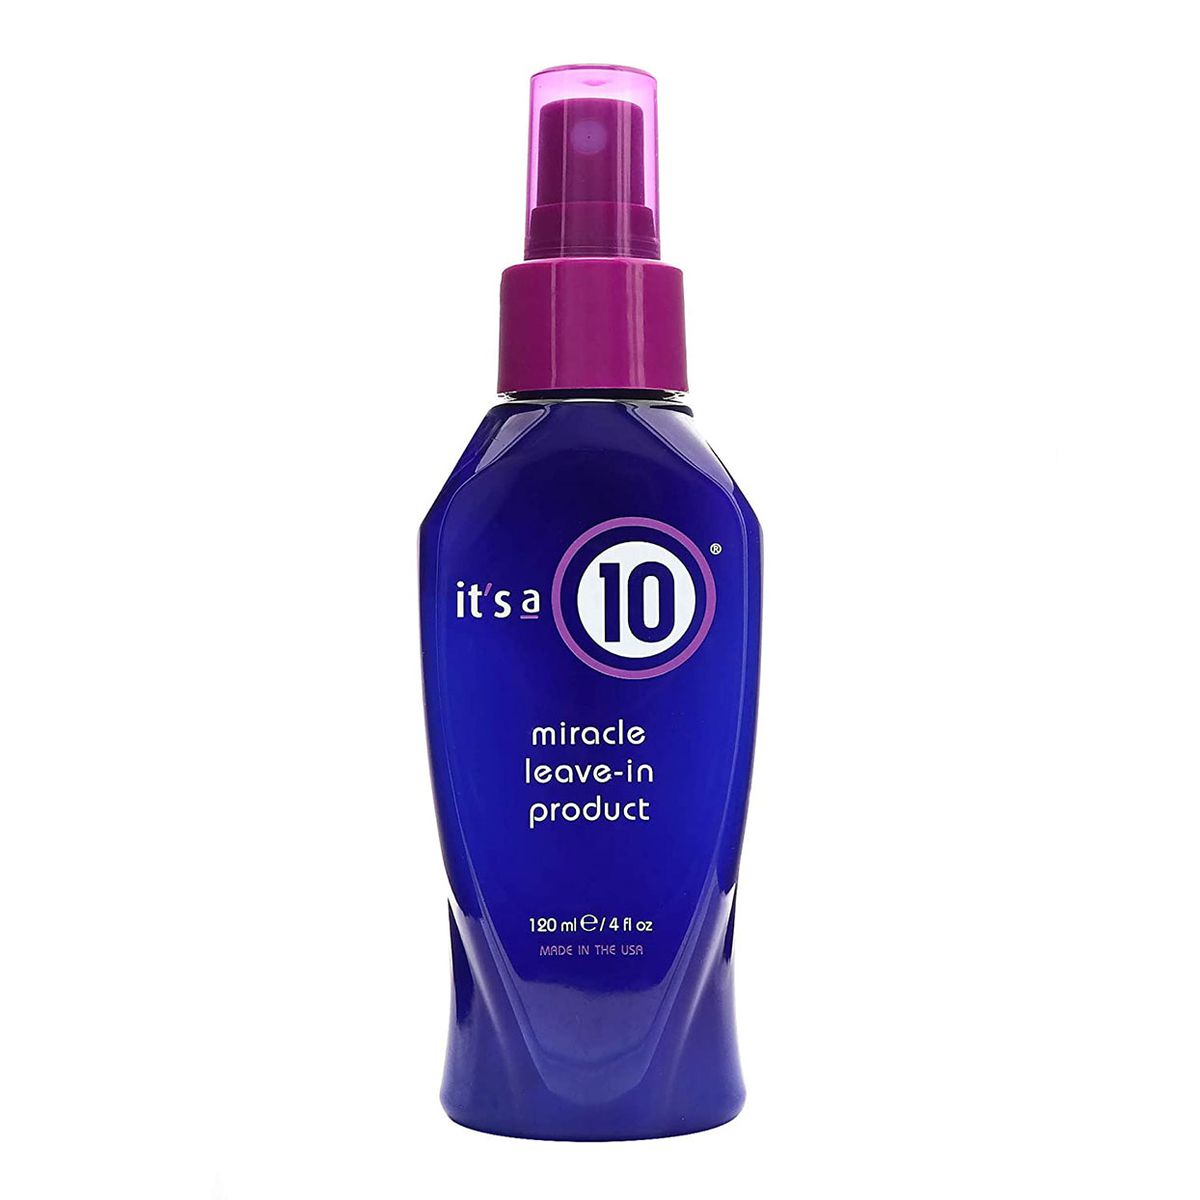 It’s a 10 Miracle Leave-In Conditioner Spray